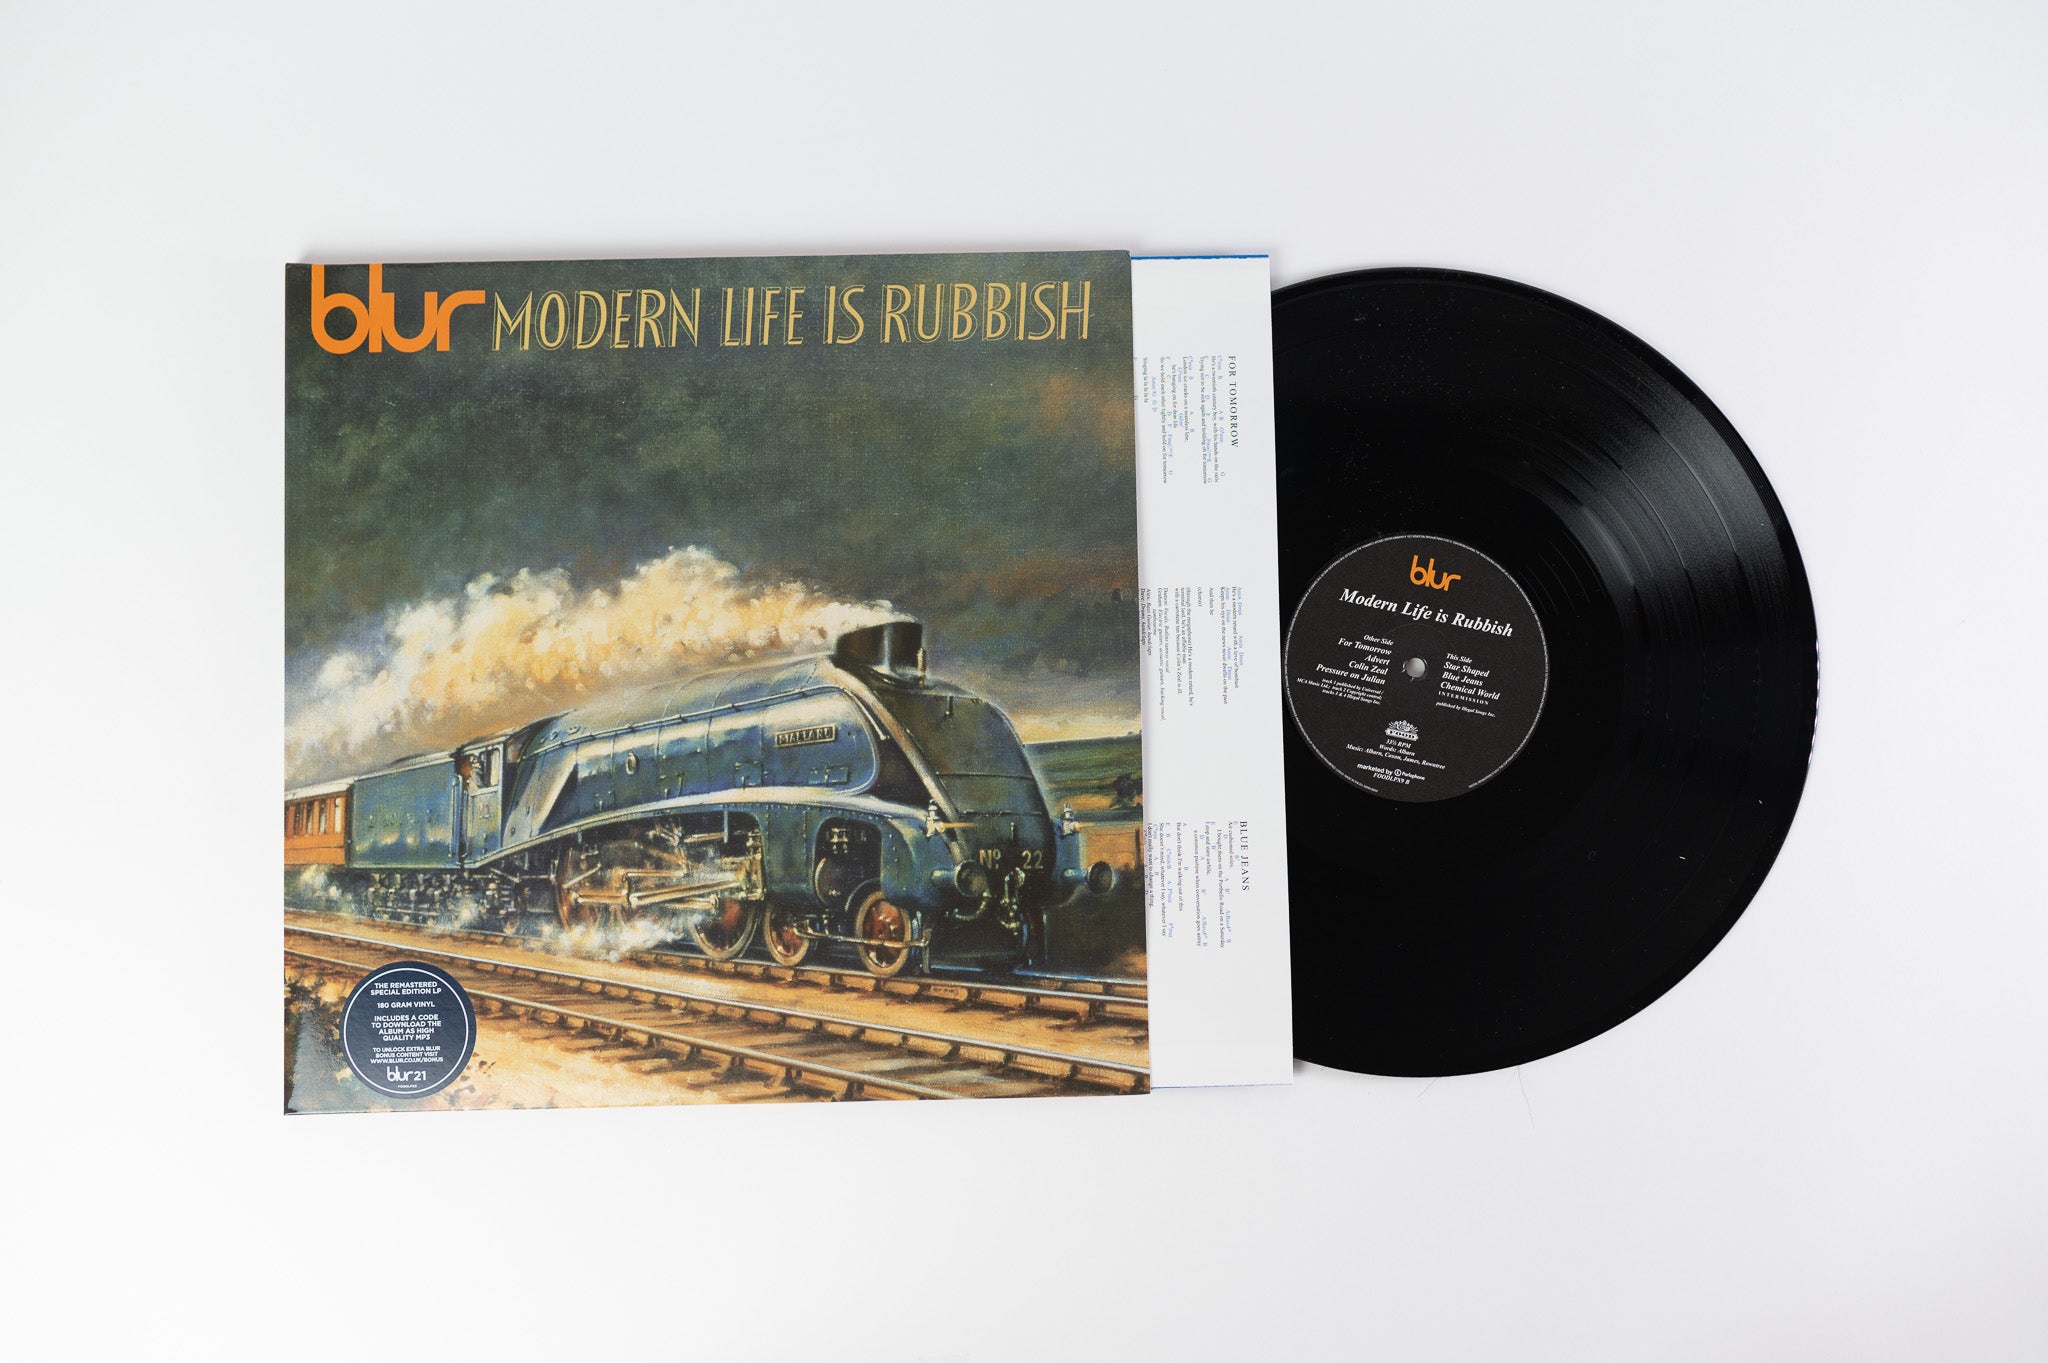 Blur - Modern Life Is Rubbish on Food Special Edition 180 Gram Reissue